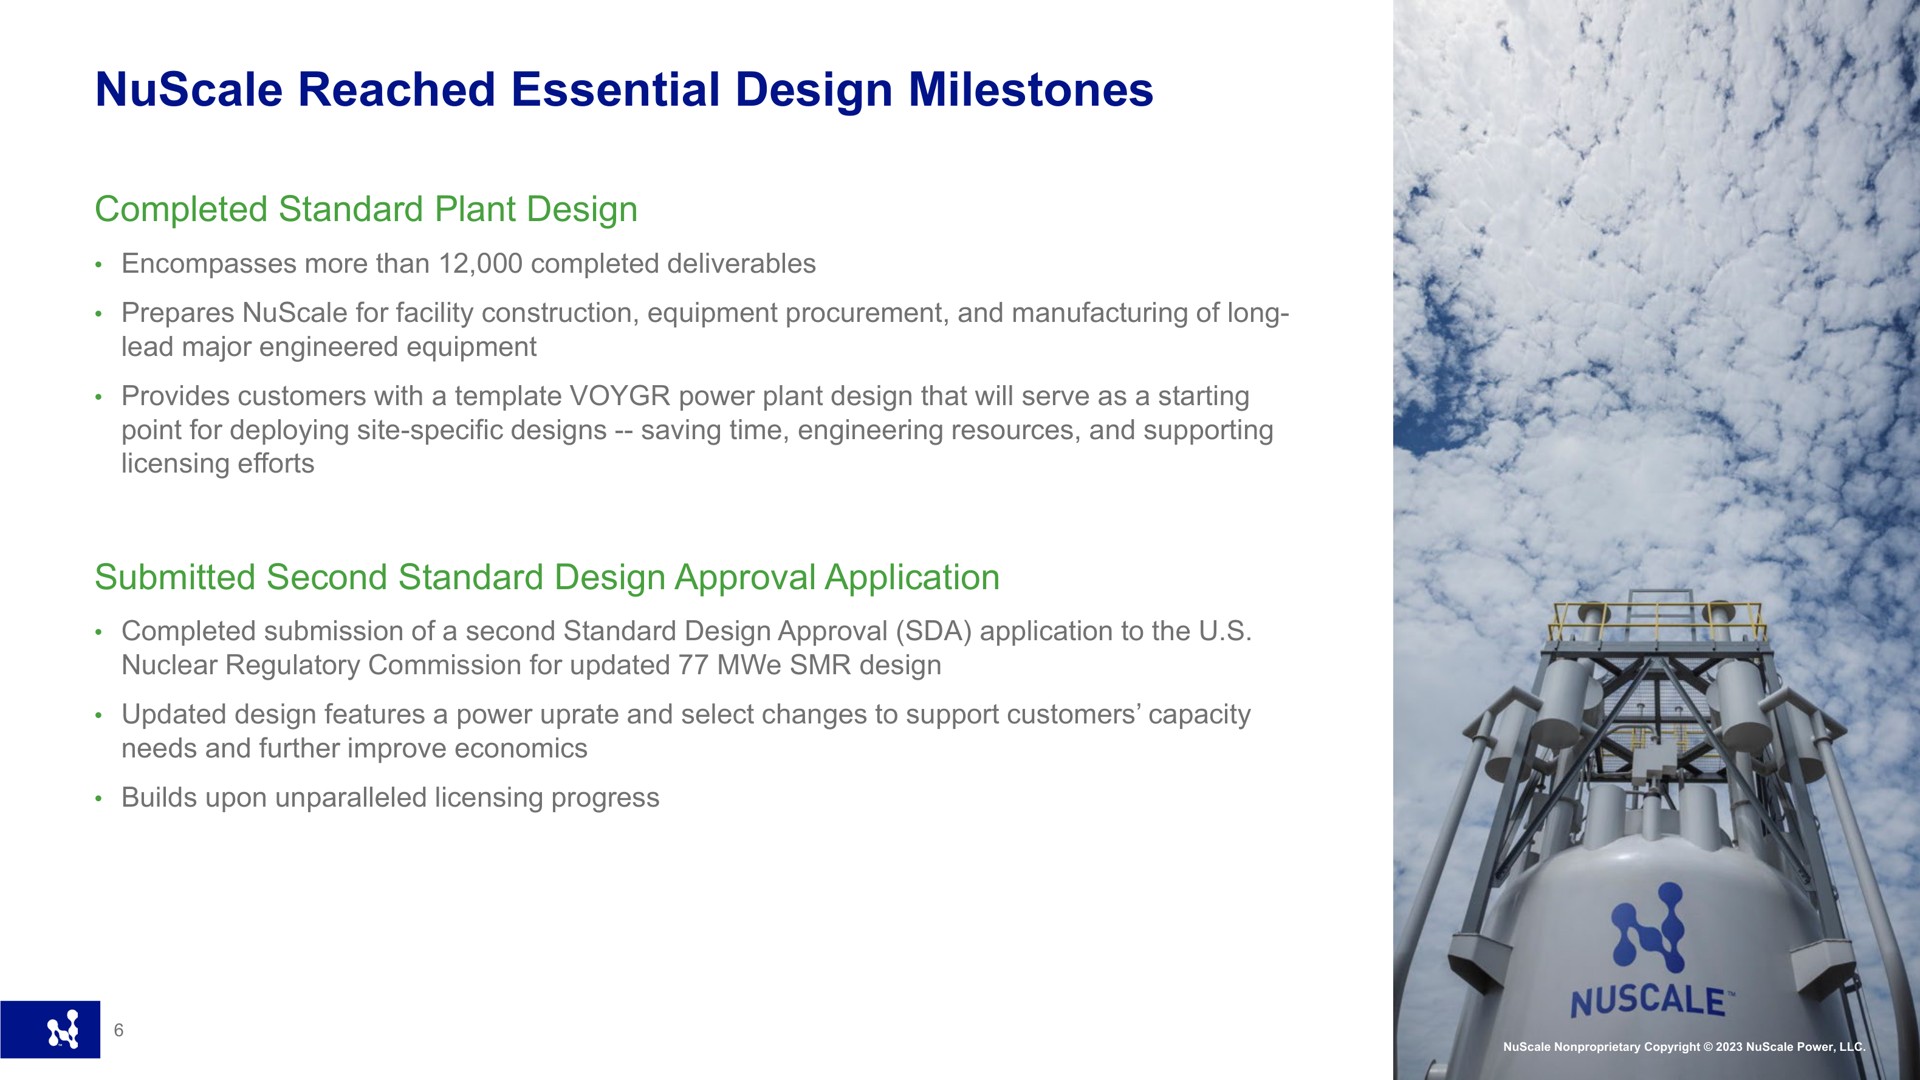 reached essential design milestones completed standard plant design submitted second standard design approval application | Nuscale